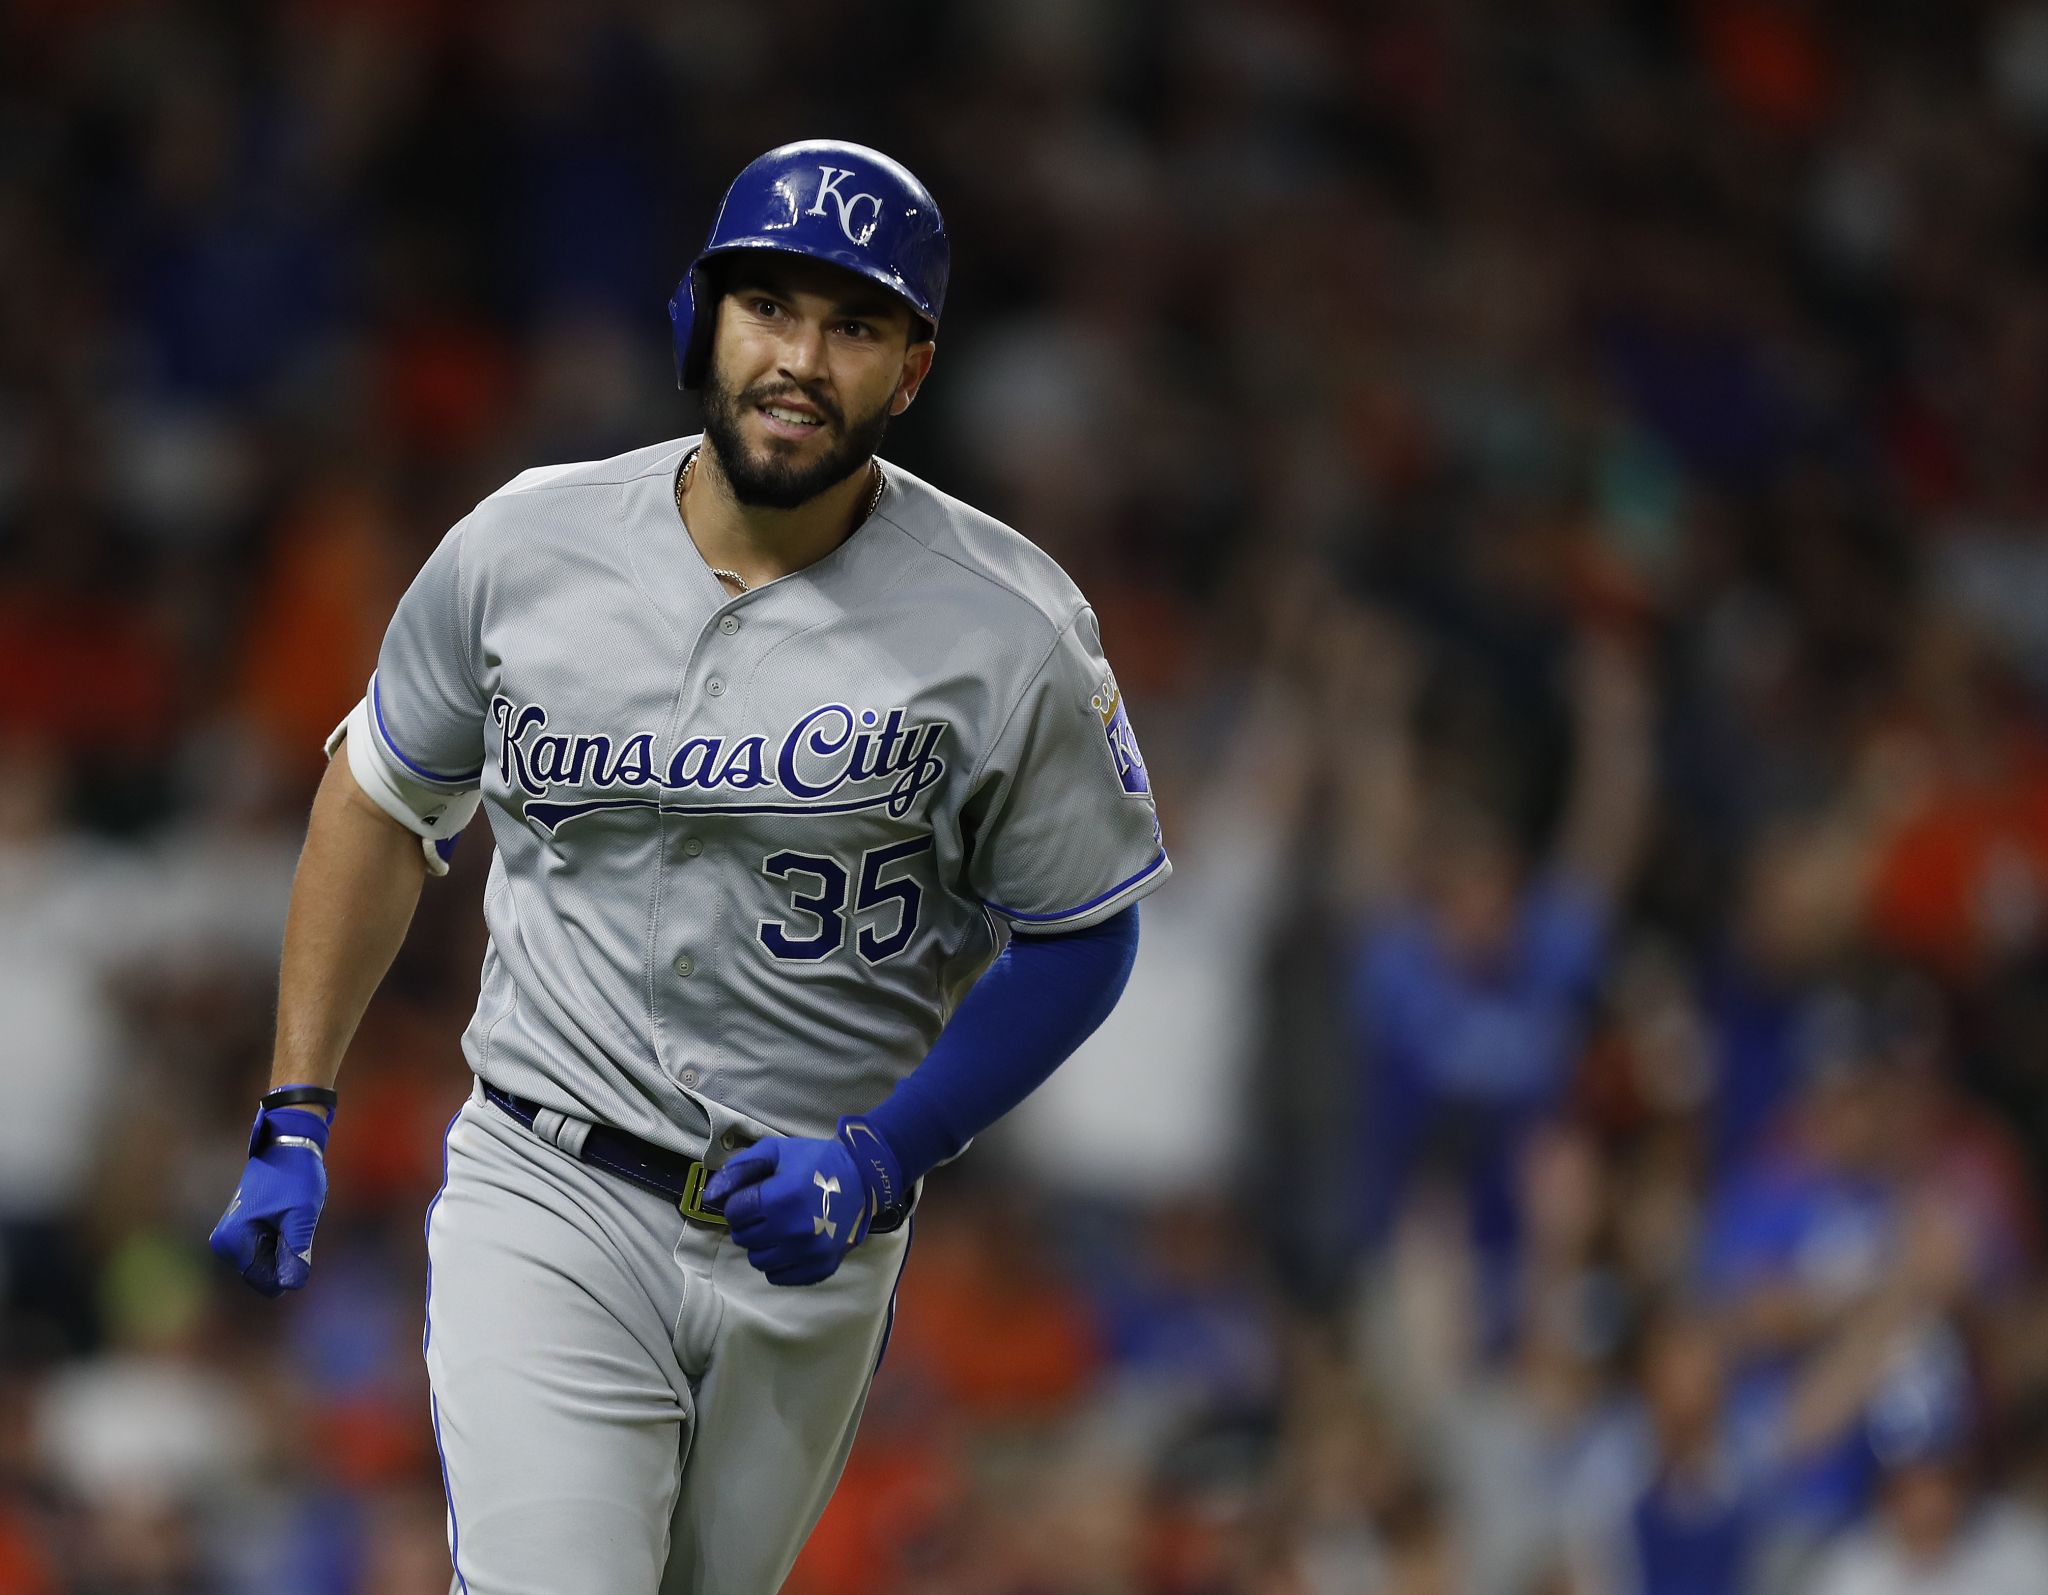 Padres say social media posts about free agent Eric Hosmer were false